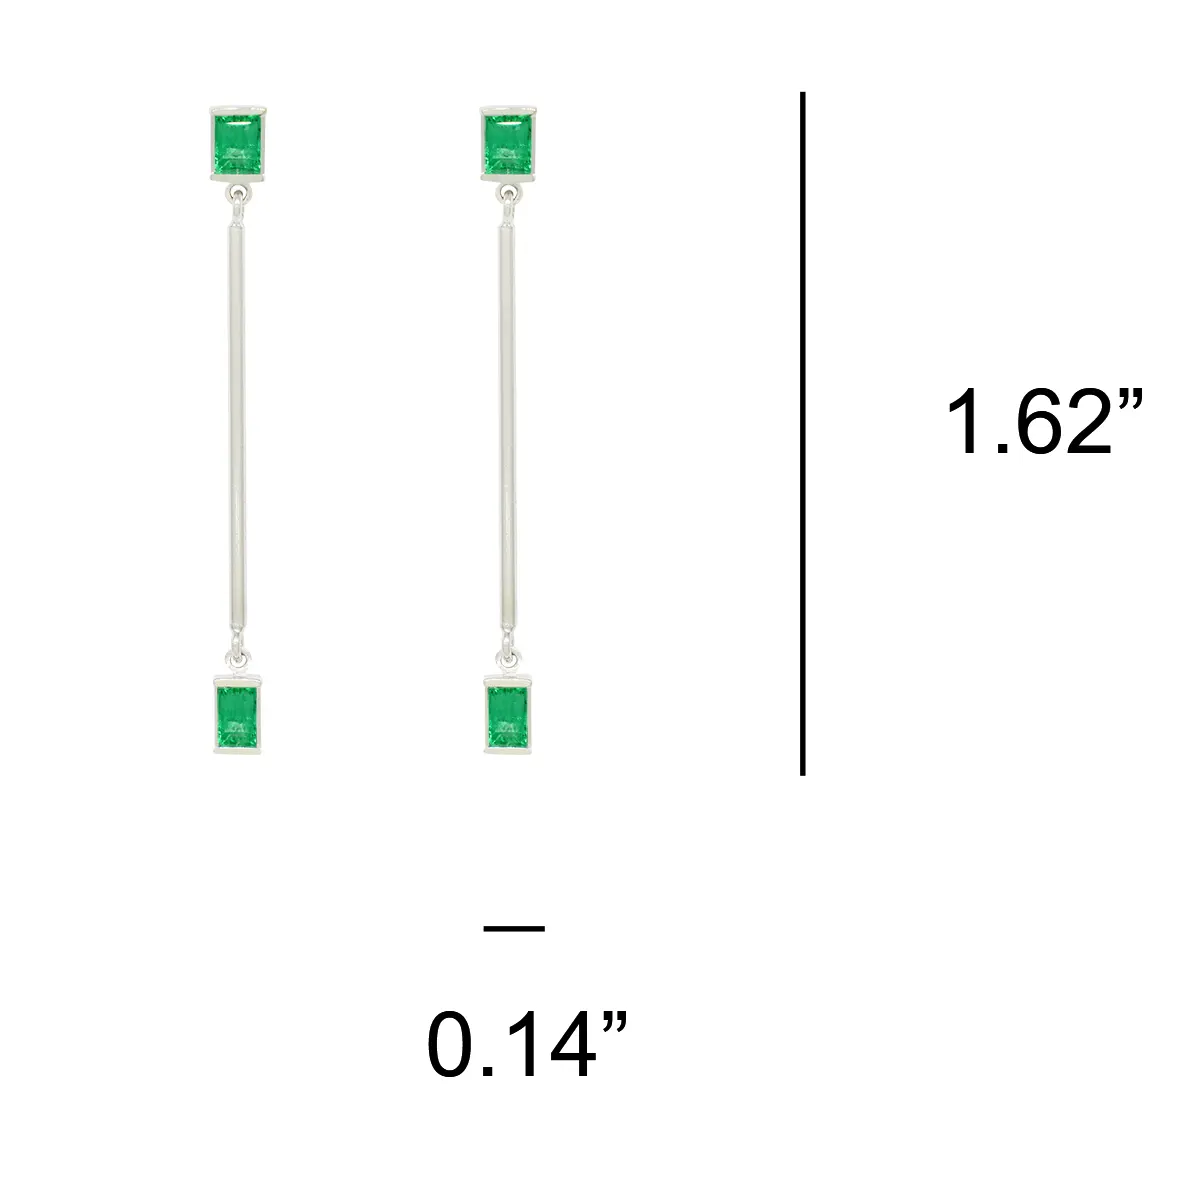 The dimensions of these emerald earrings are 1.62 inches high by 0.14 inches wide